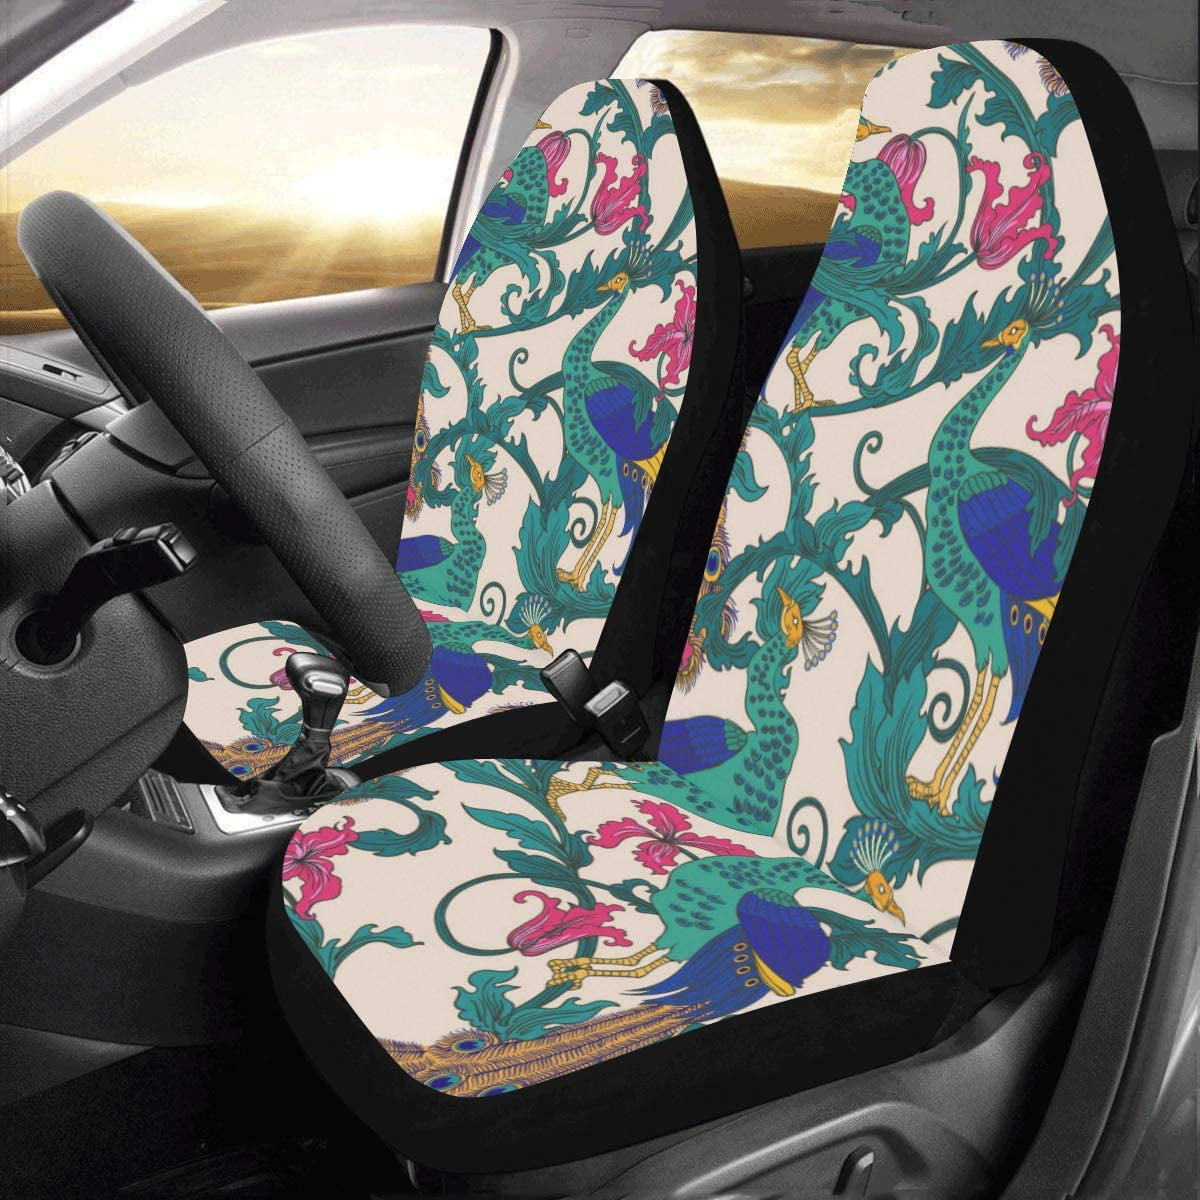 INTERESTPRINT Car Seat Covers for Car & SUV Set of 2 